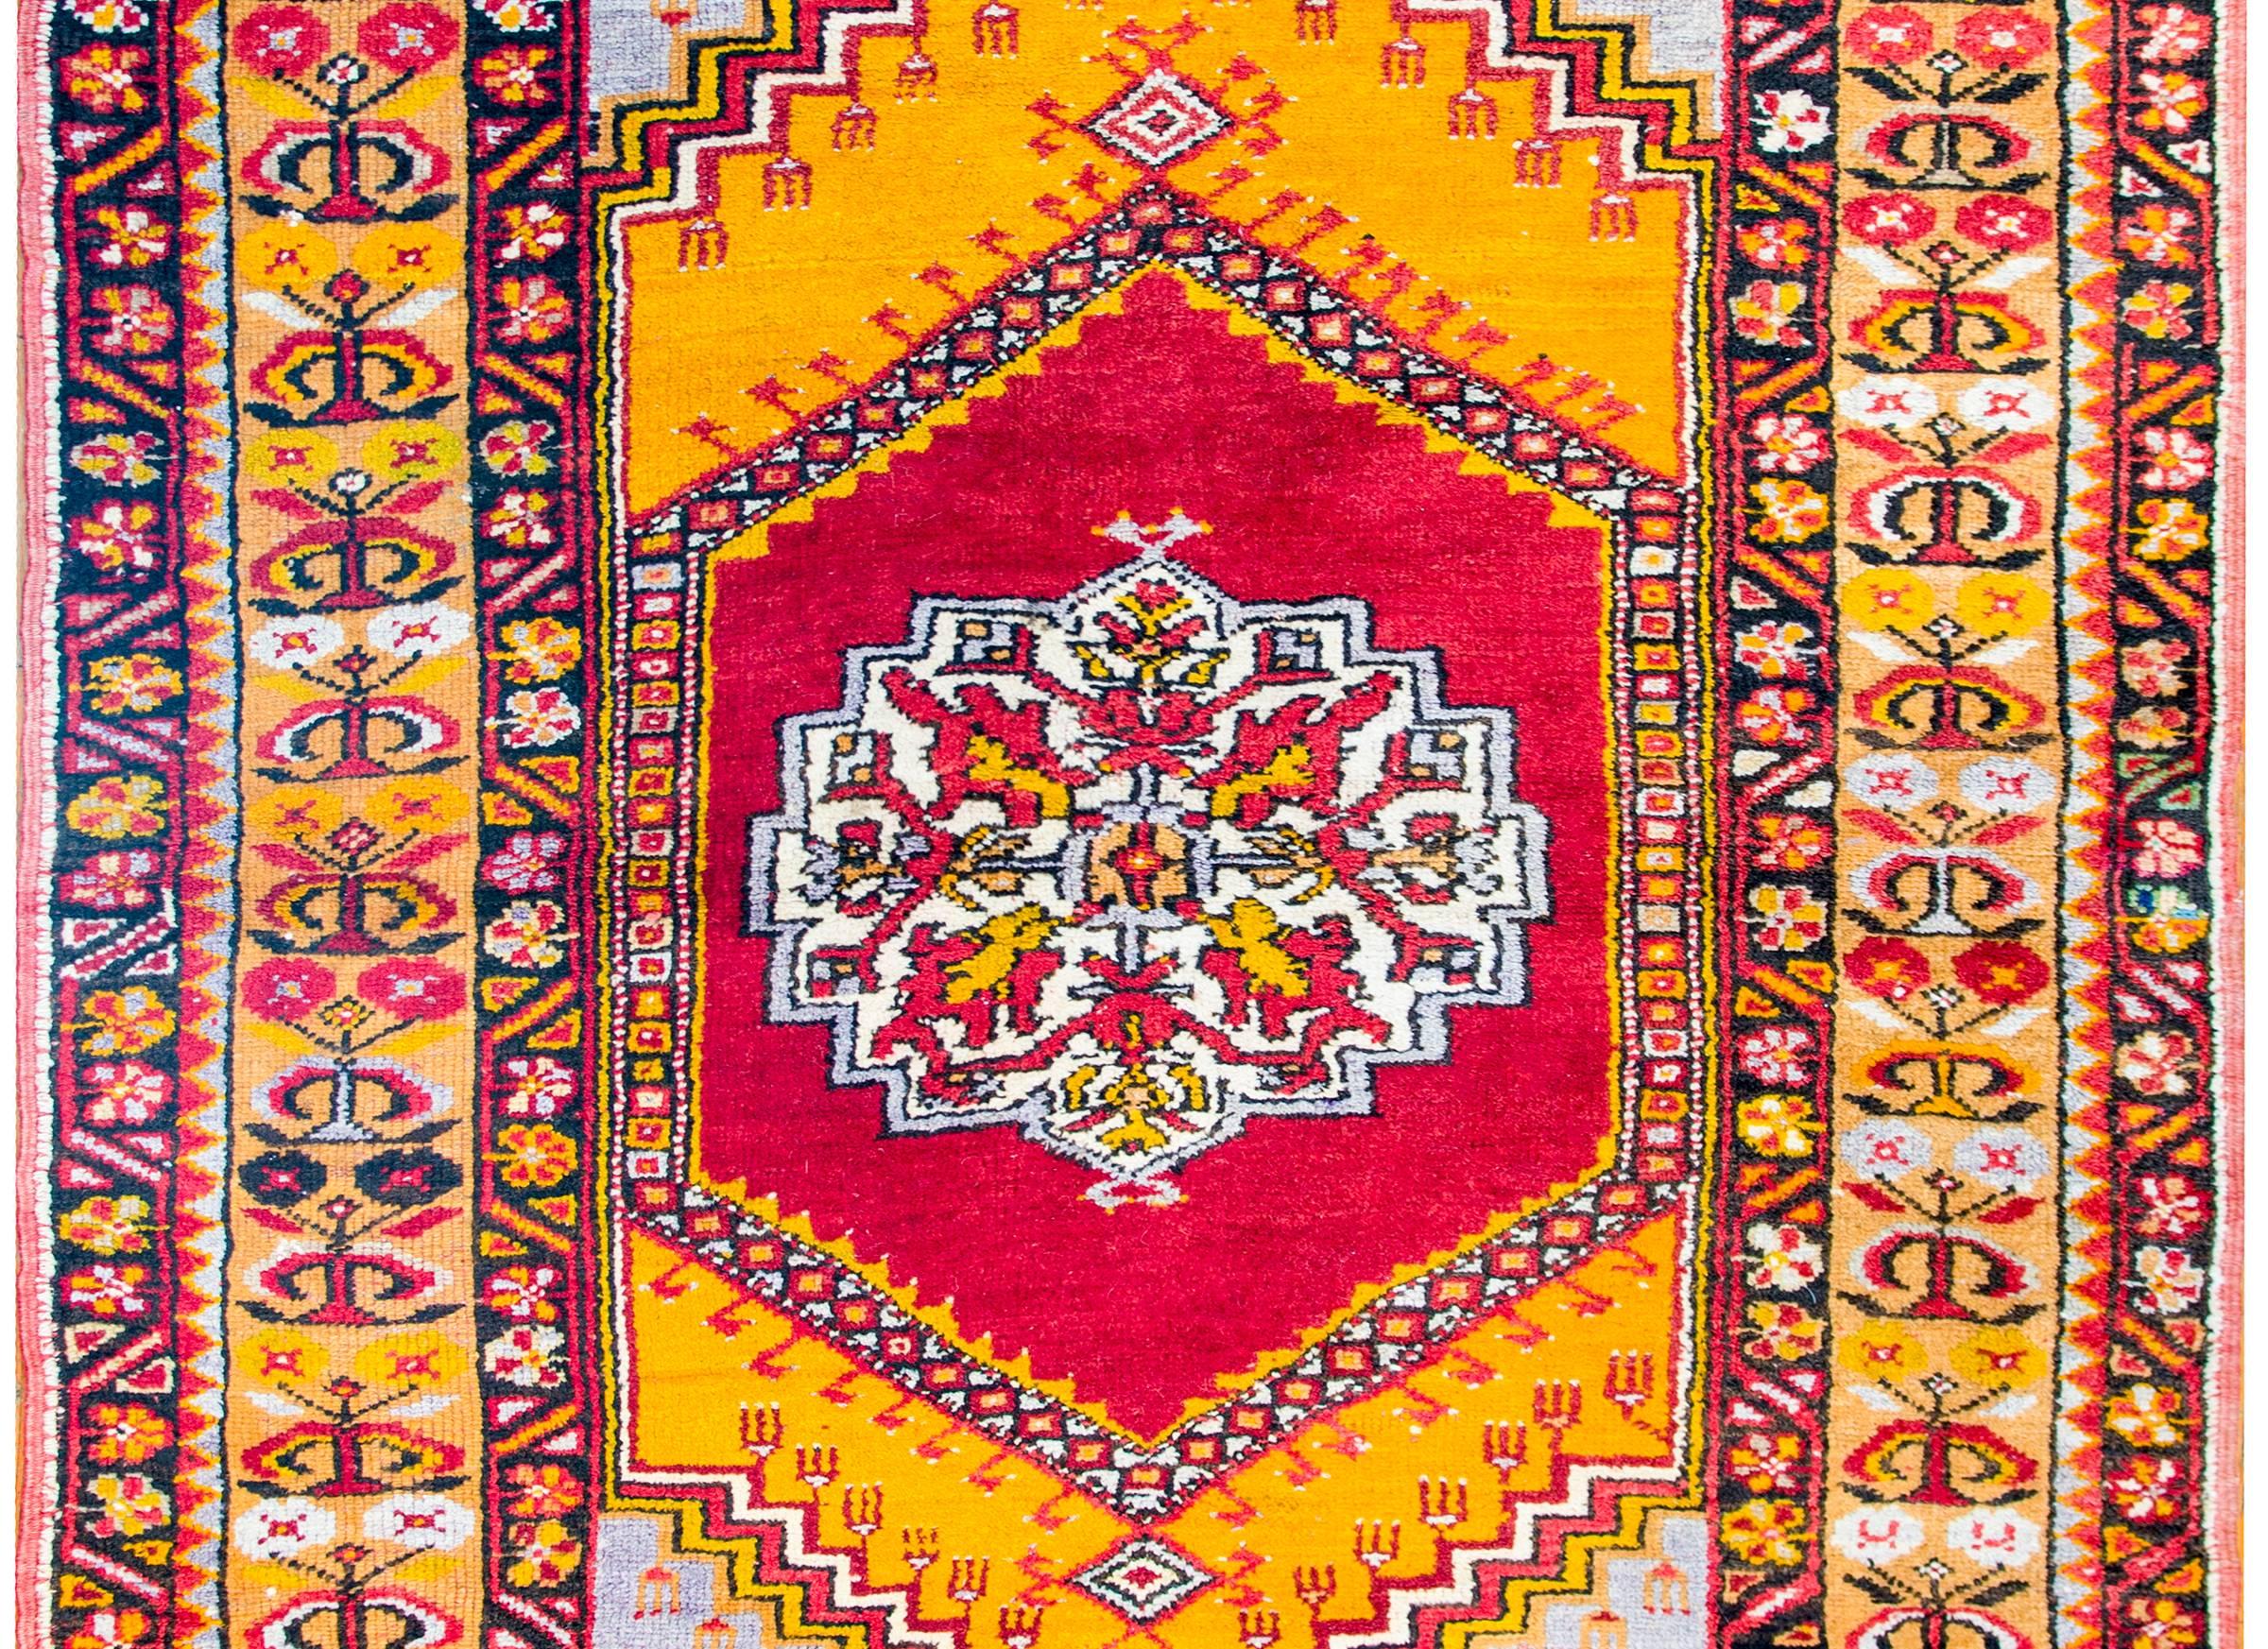 An early 20th century Anatolian Turkish multicolored rug with multiple a large central floral medallion on crimson and gold backgrounds surrounded by a wide floral patterned stripe border, flanked by matching petite floral patterned stripes.